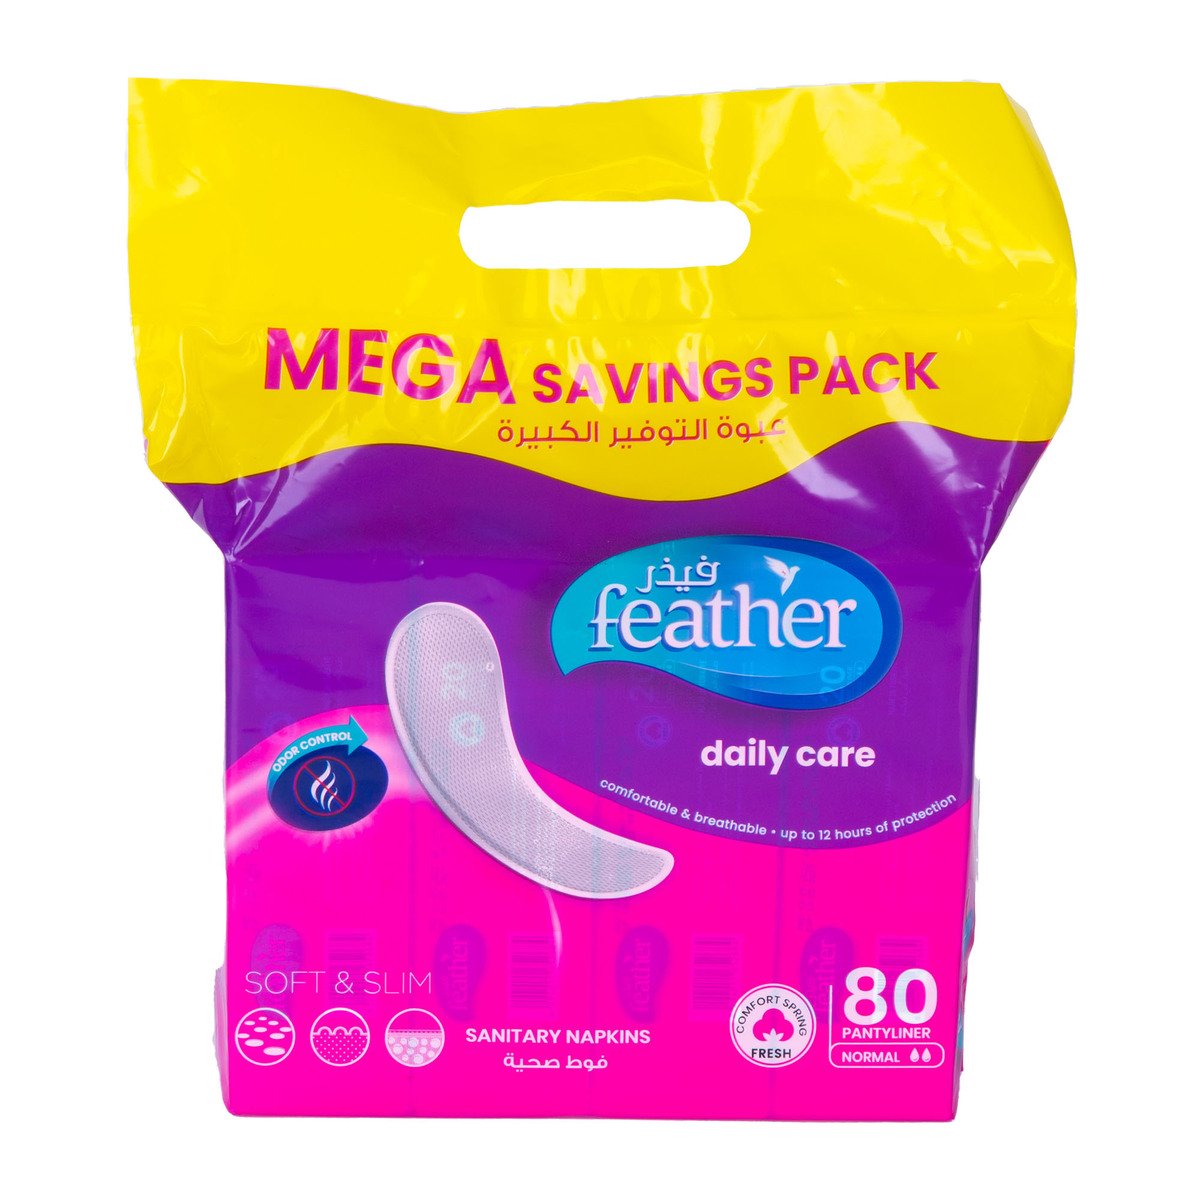 Feather Daily Care Pantyliner 80 pcs